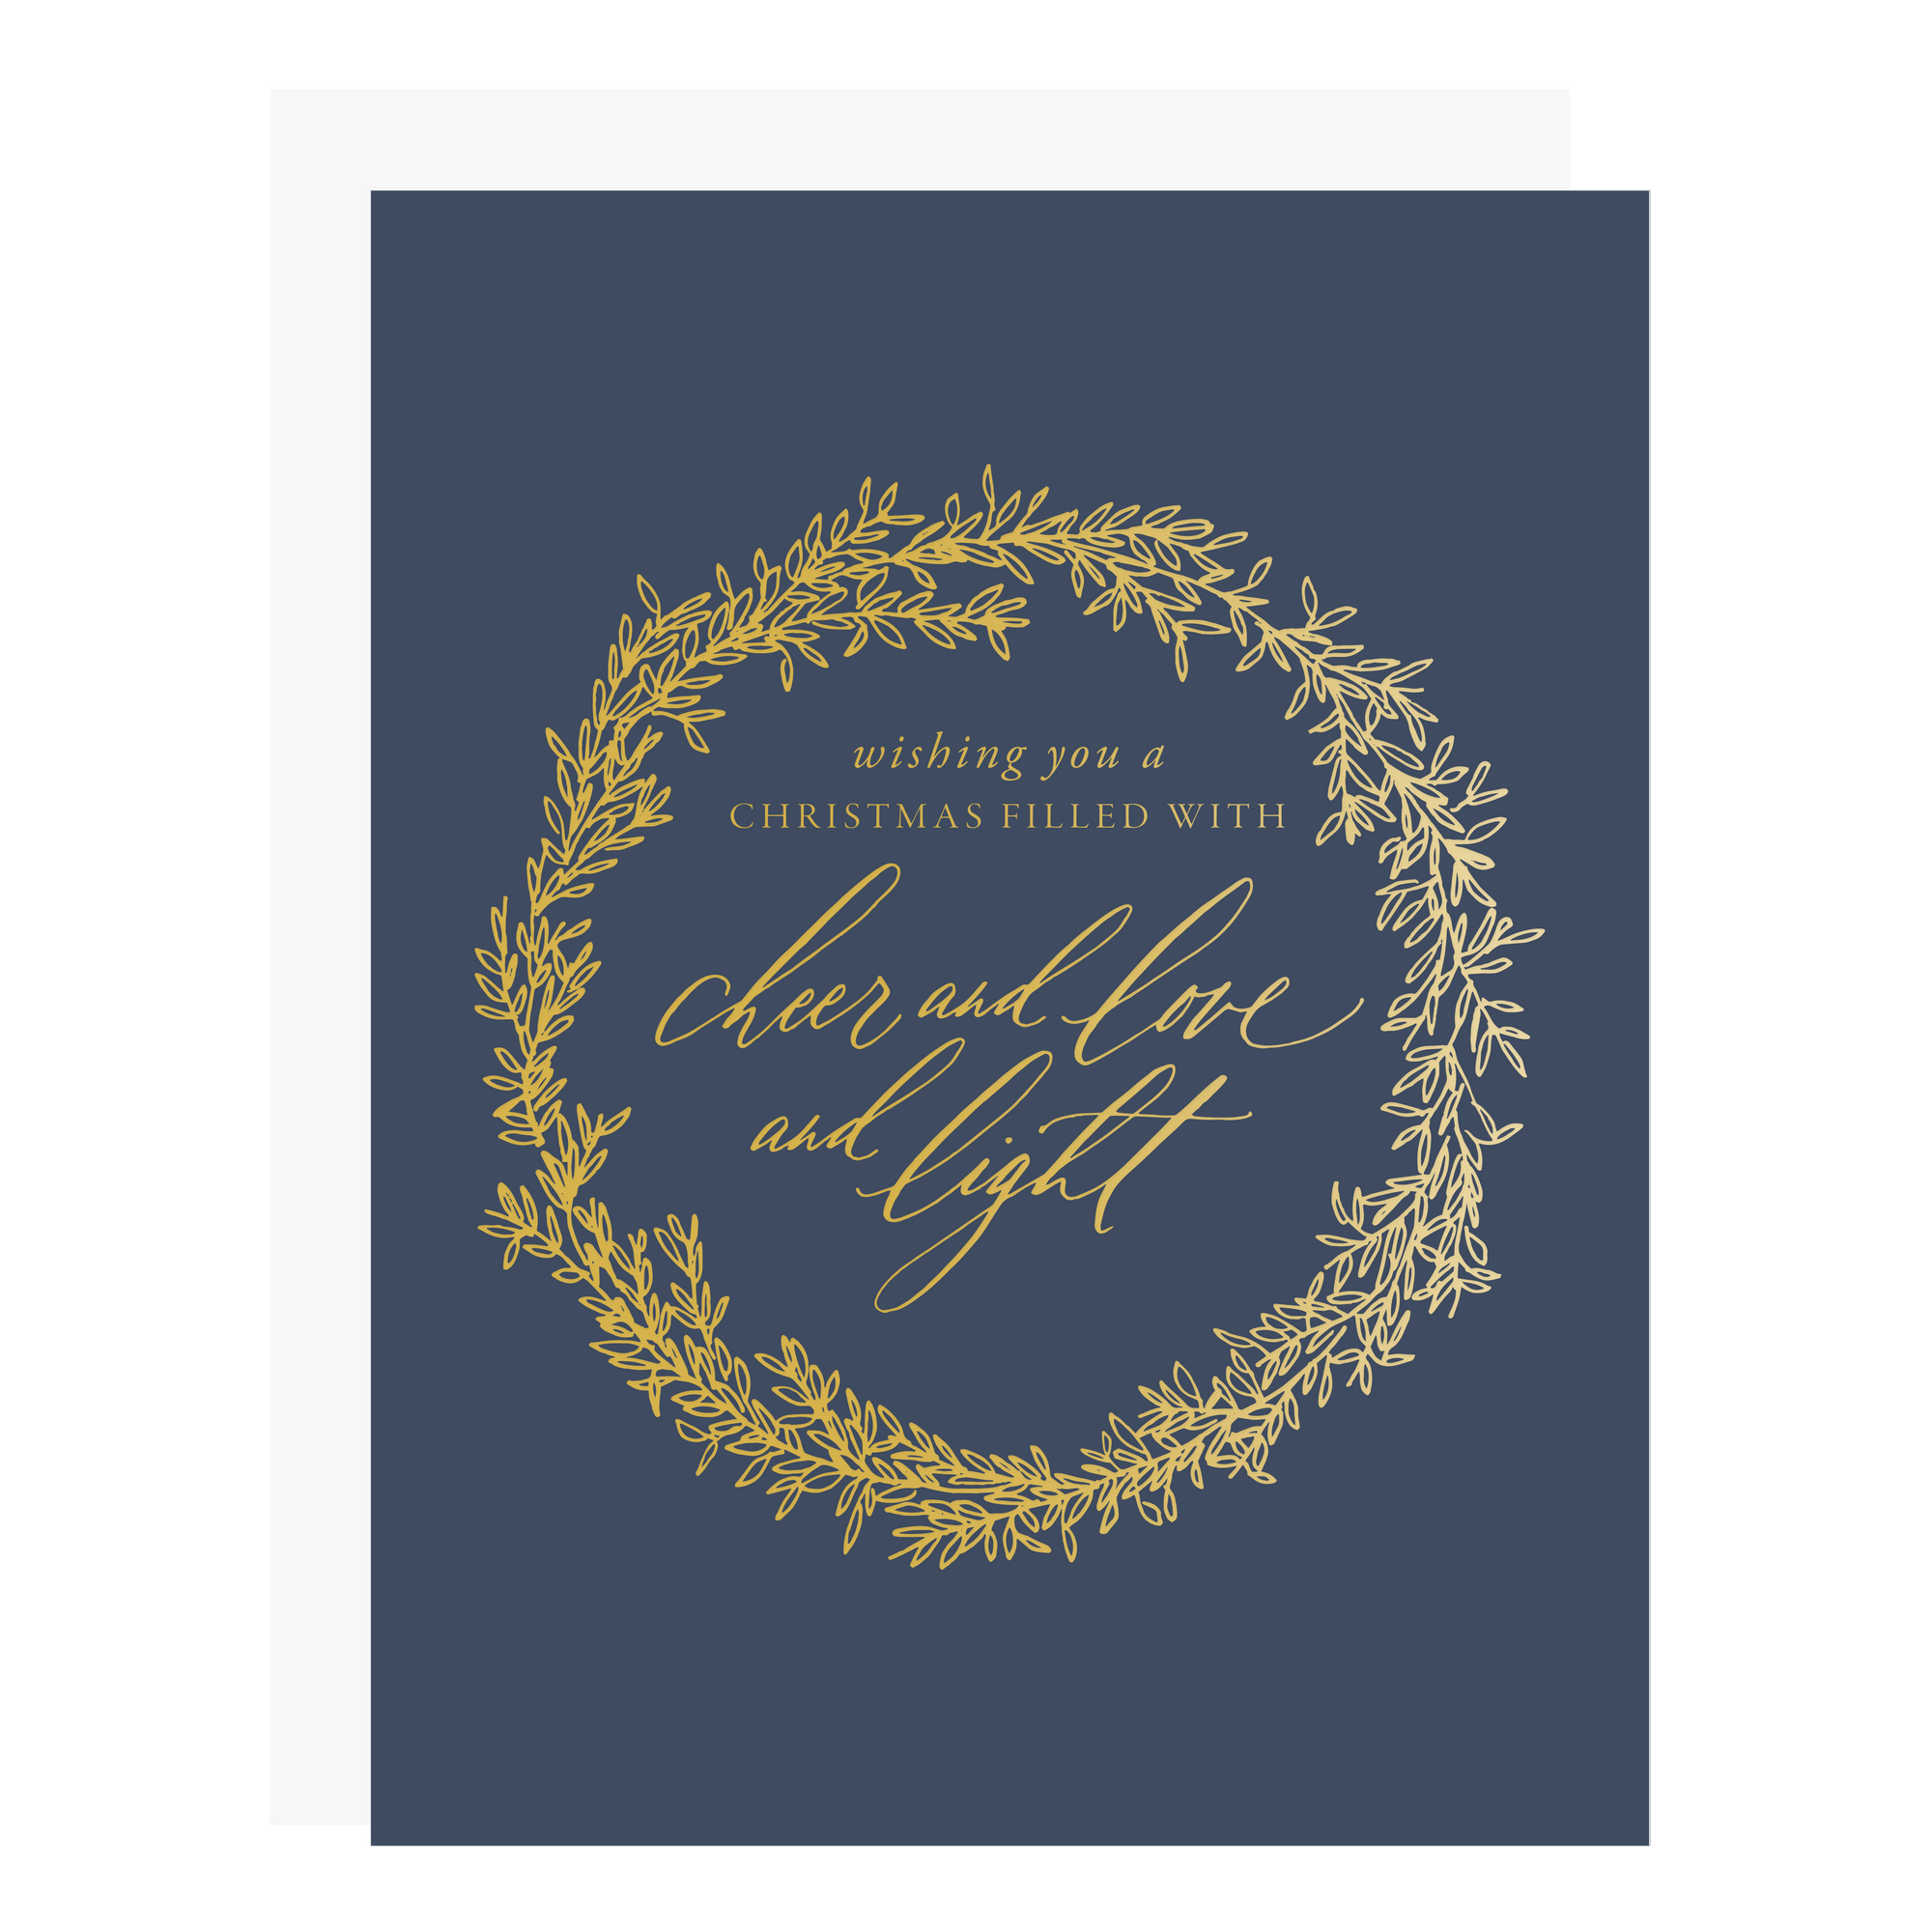 "Cheer, Love, and Light" Christmas card, letterpress printed by hand in gold foil. 